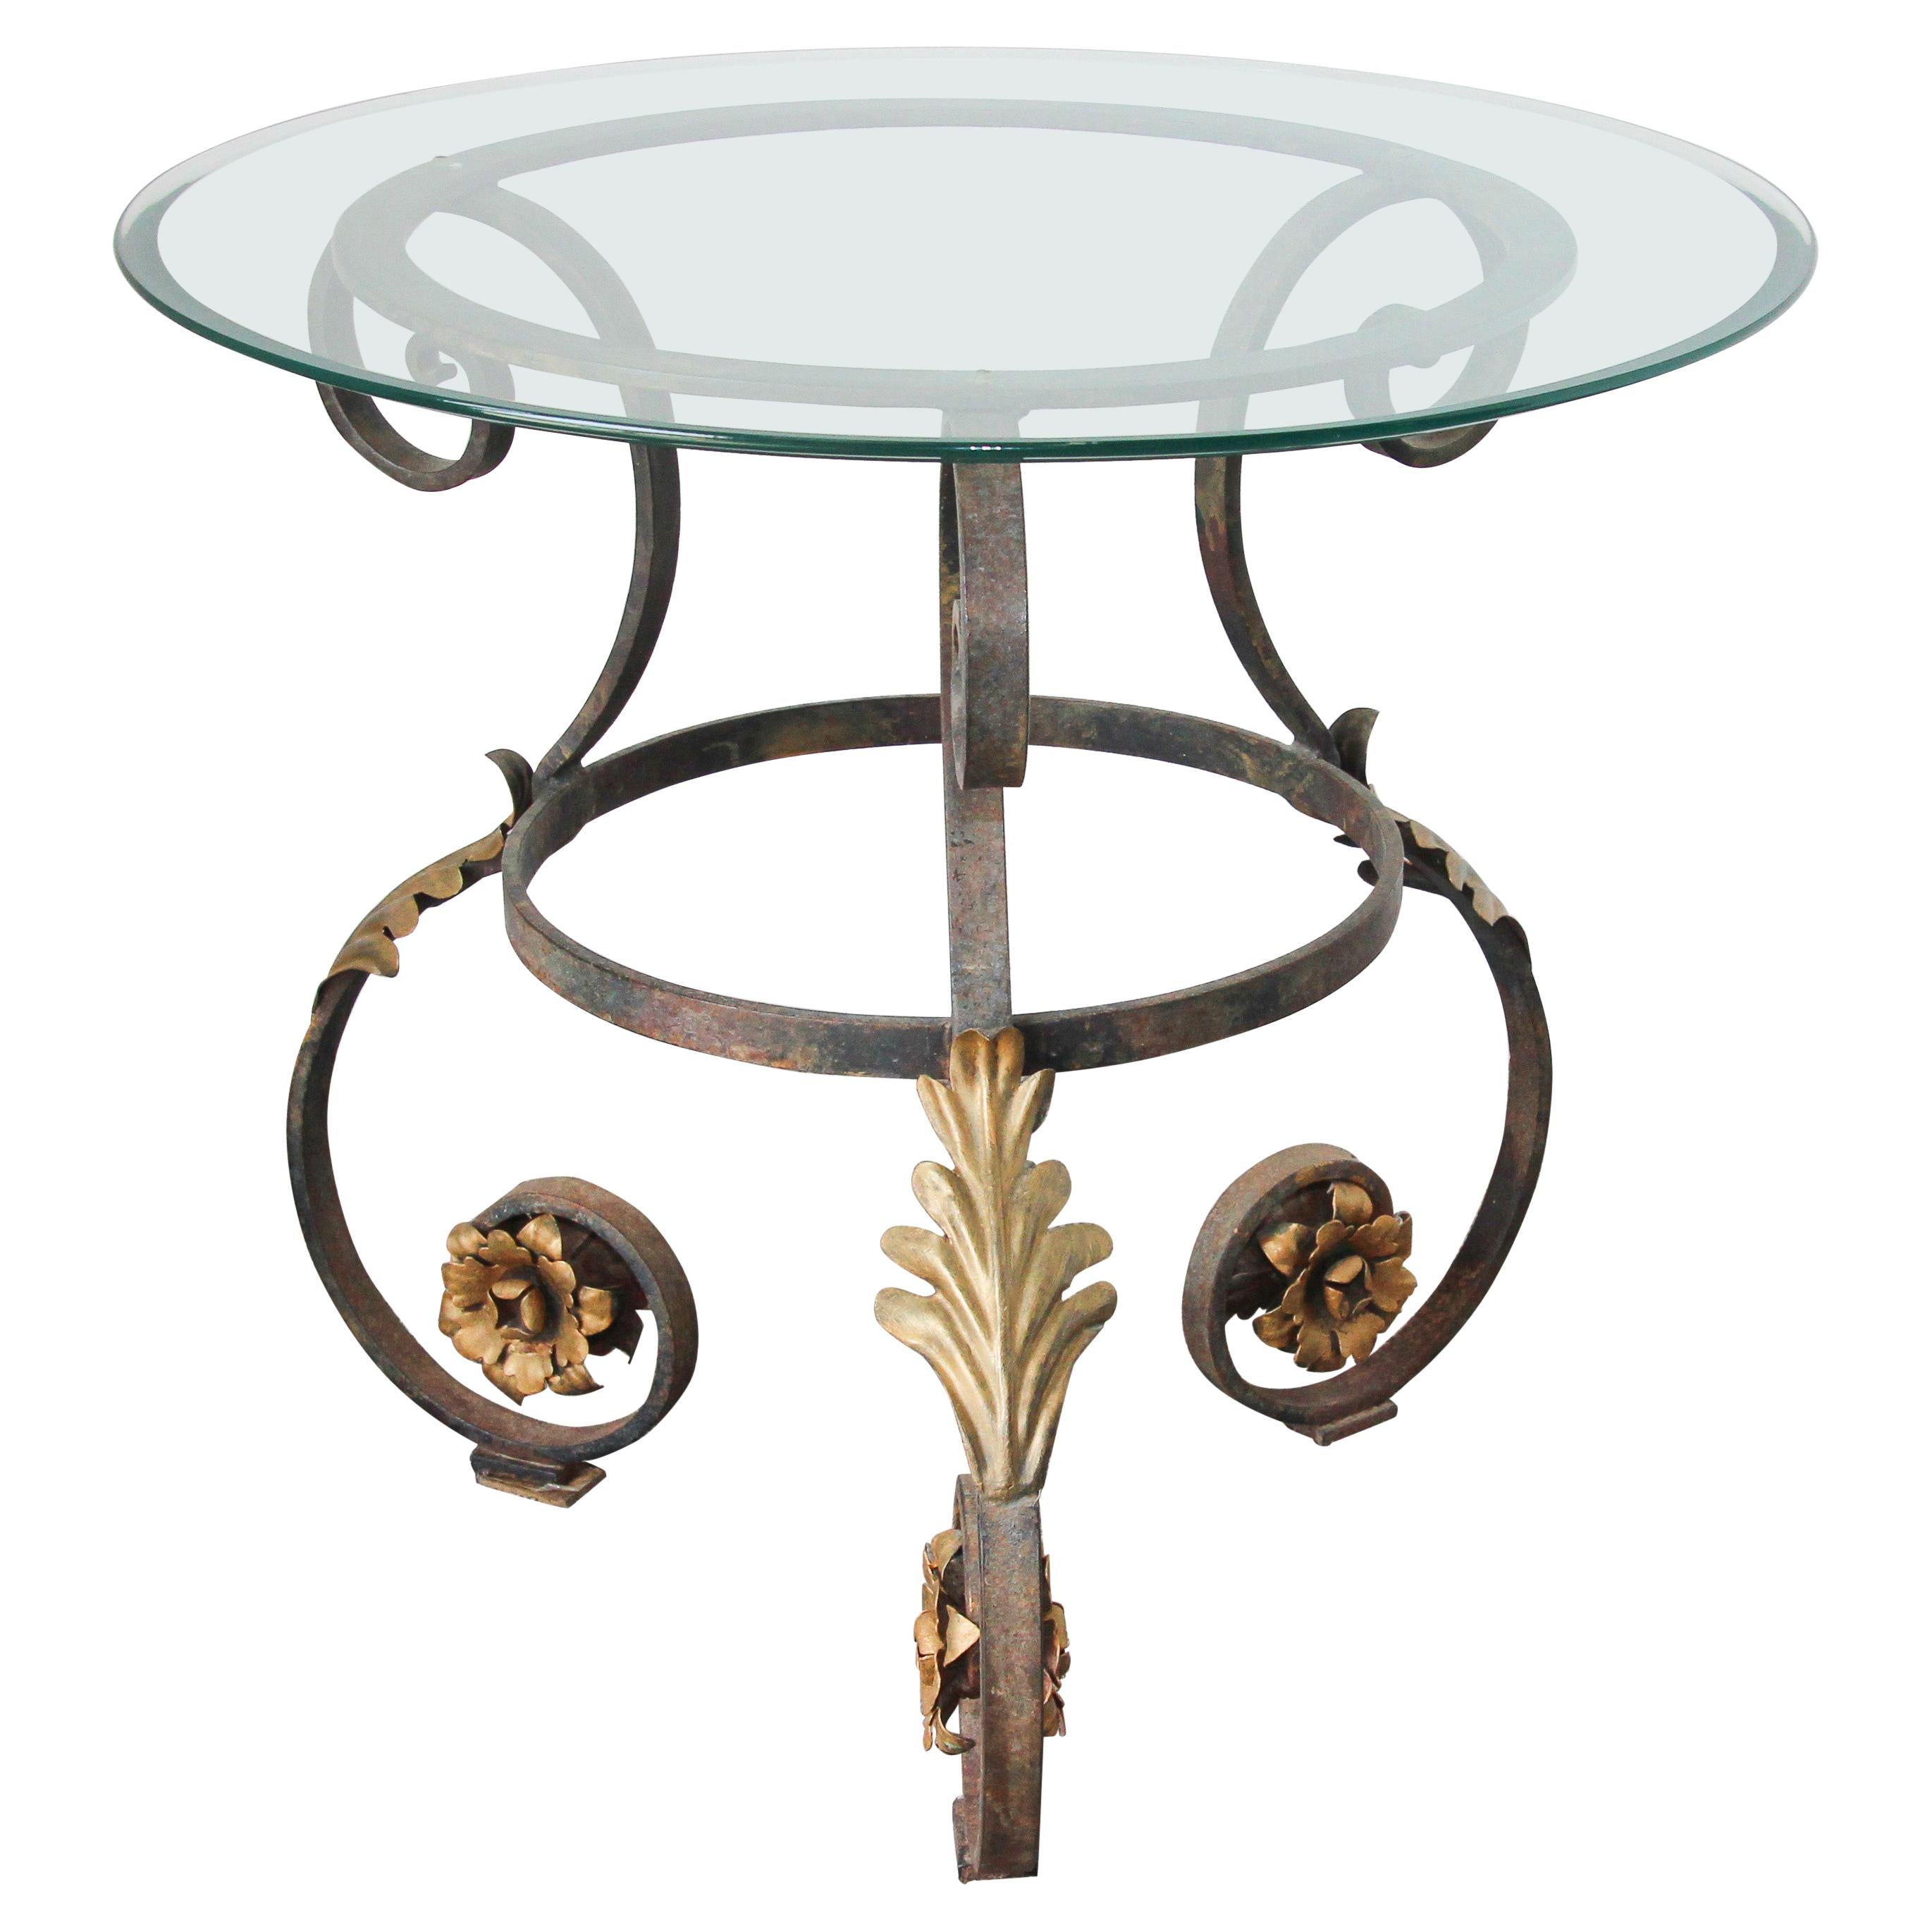 Art Nouveau Italian Glass Table top with Iron frame Indoor or Outdoor